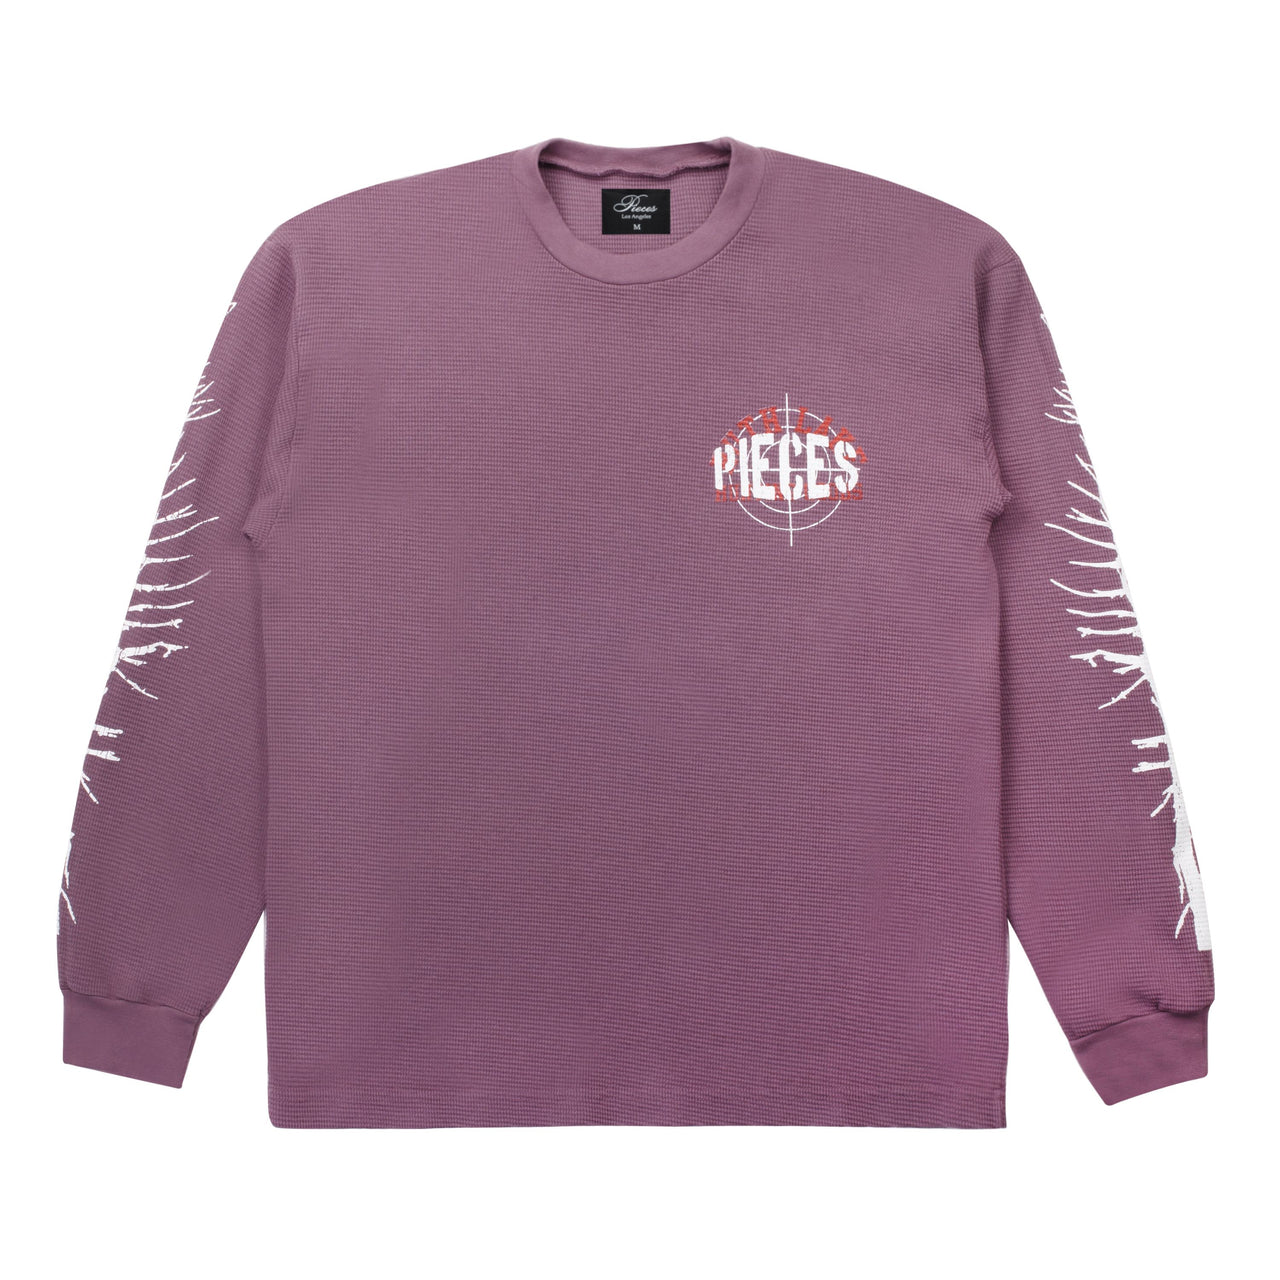 Pieces Ruth Lake Thermal Dusty Mauve